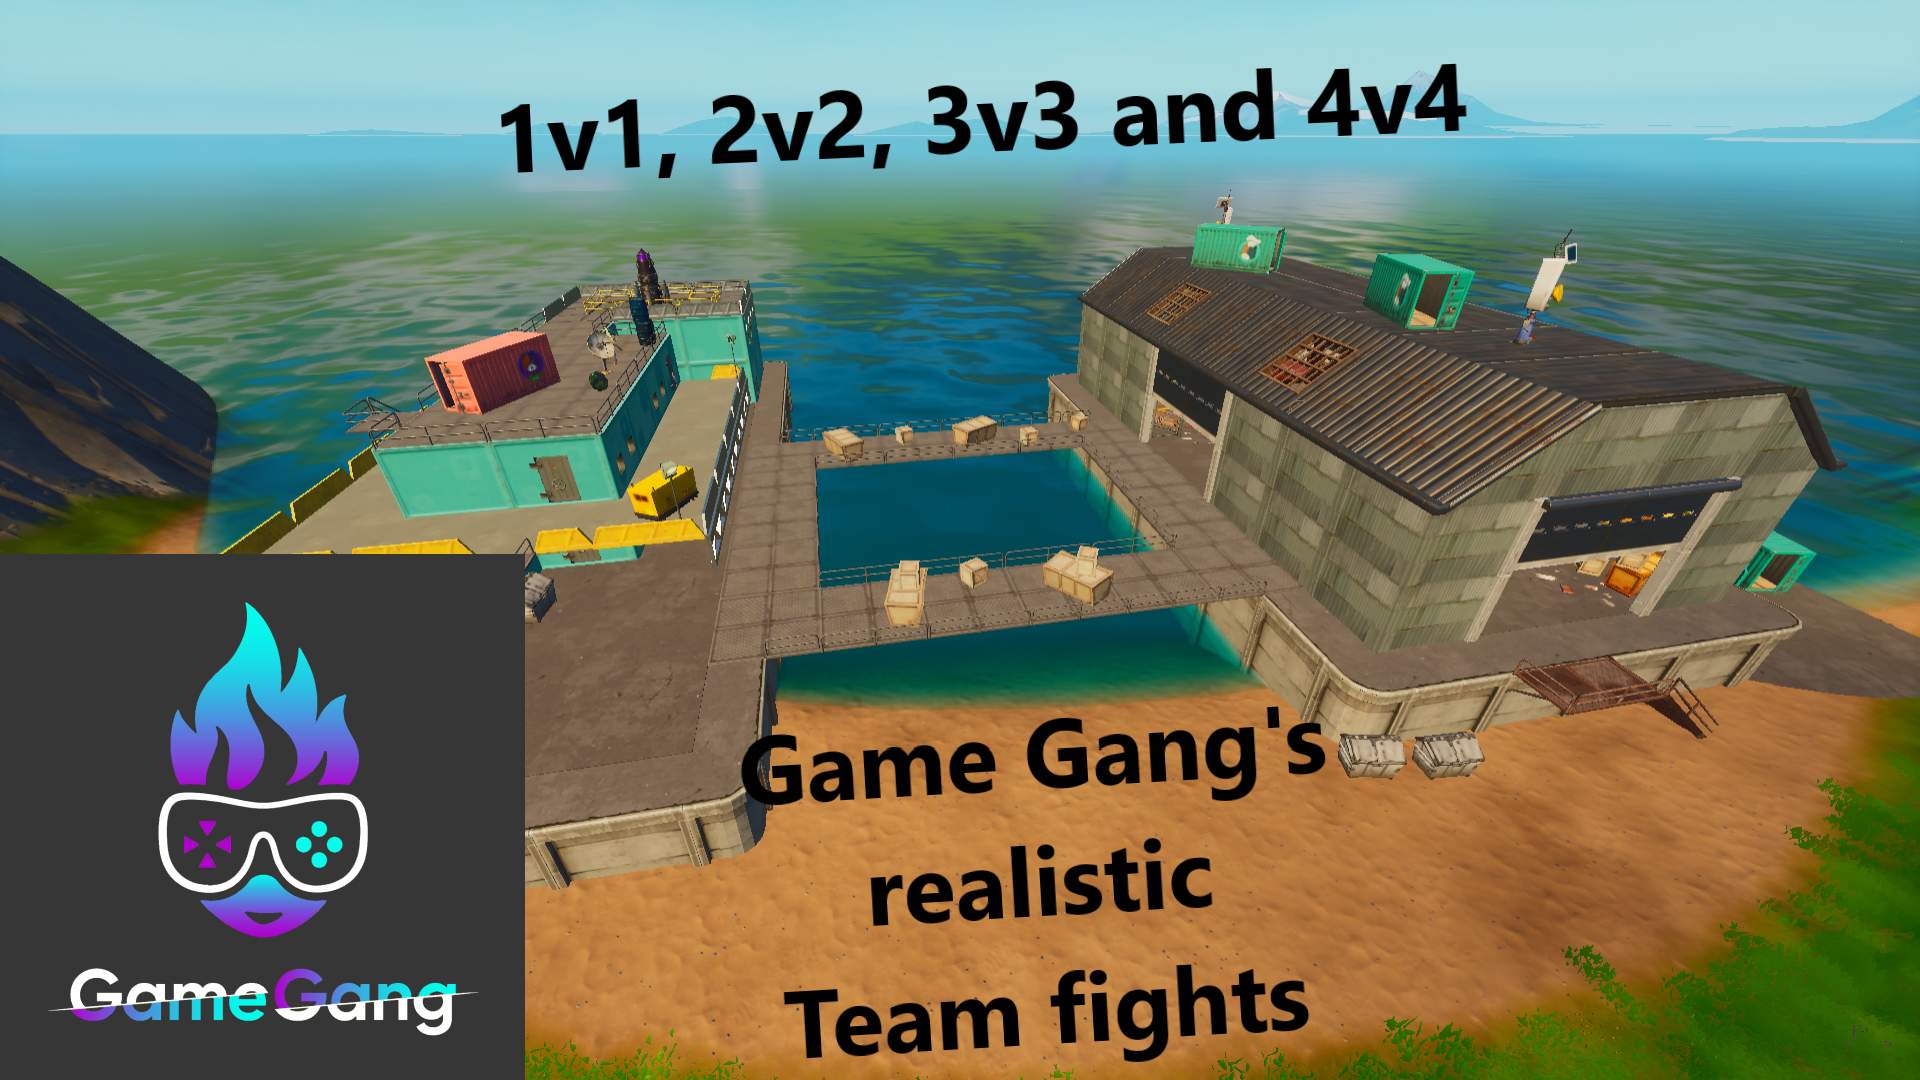 GAMEGANG REALISTIC TEAM FIGHTS